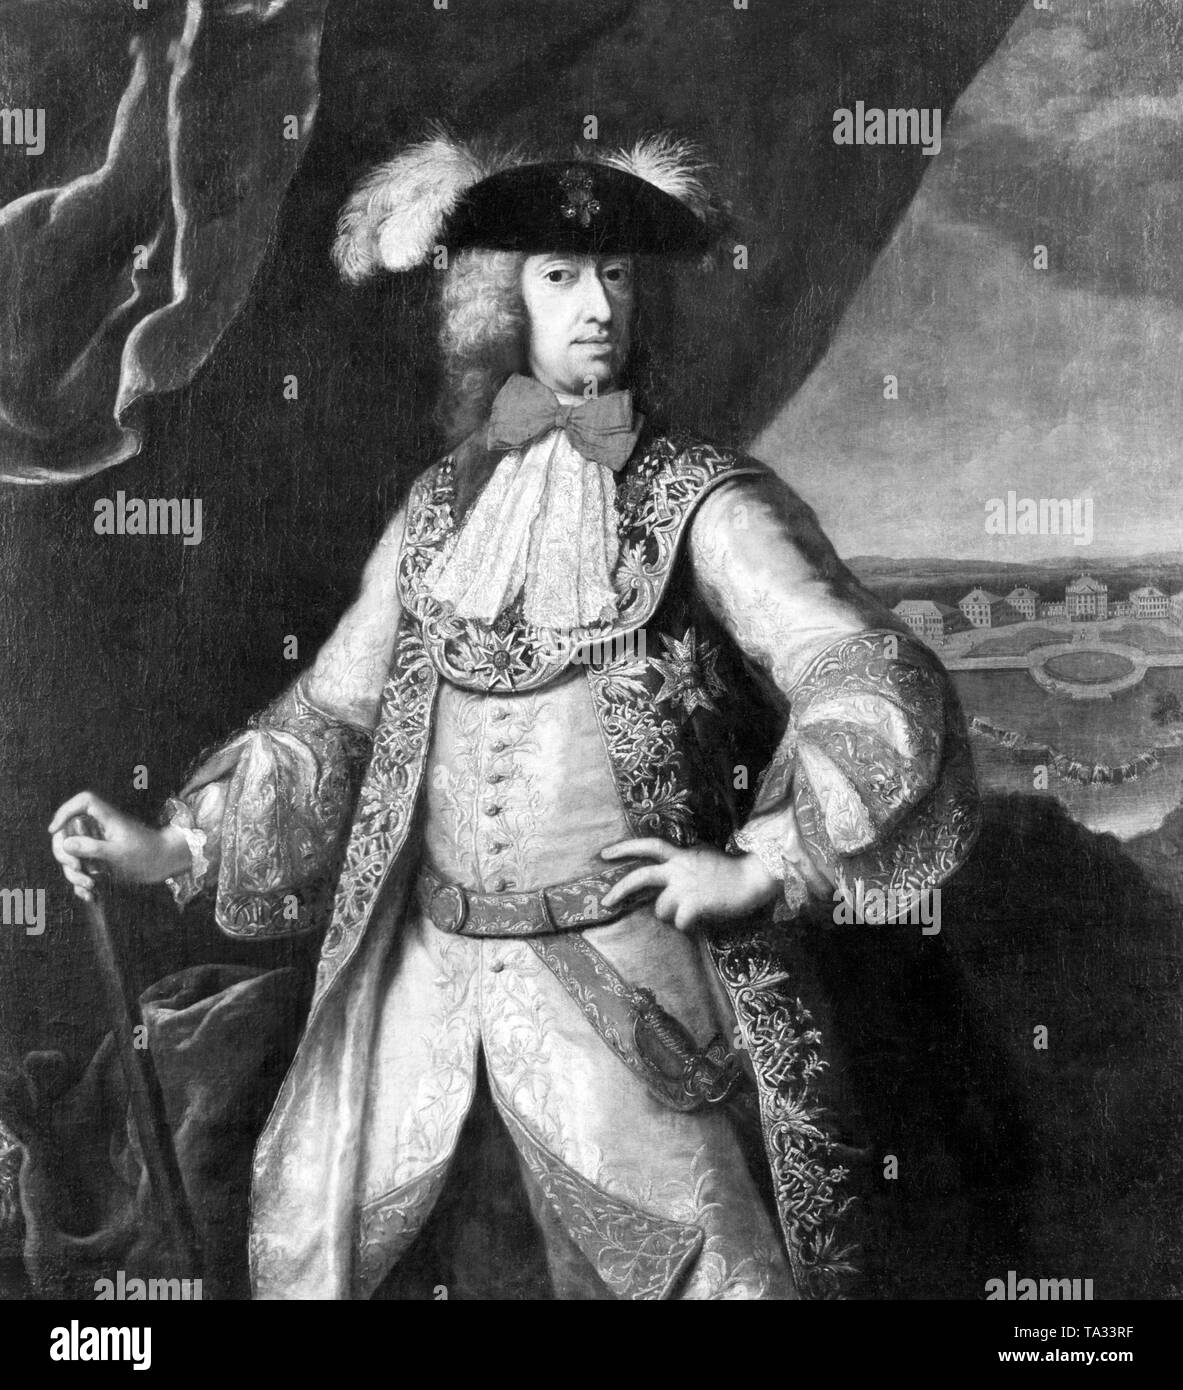 This painting by Franz Joseph Winter shows Elector and Duke Charles Albert of Bavaria, the later Emperor Charles VII (1742-1745), in the Grand Master's Regalia of the Order of St. George. The chivalric order of St. George, the most famous Bavarian knight order, is the house order of the Wittelsbach dynasty even today. Stock Photo